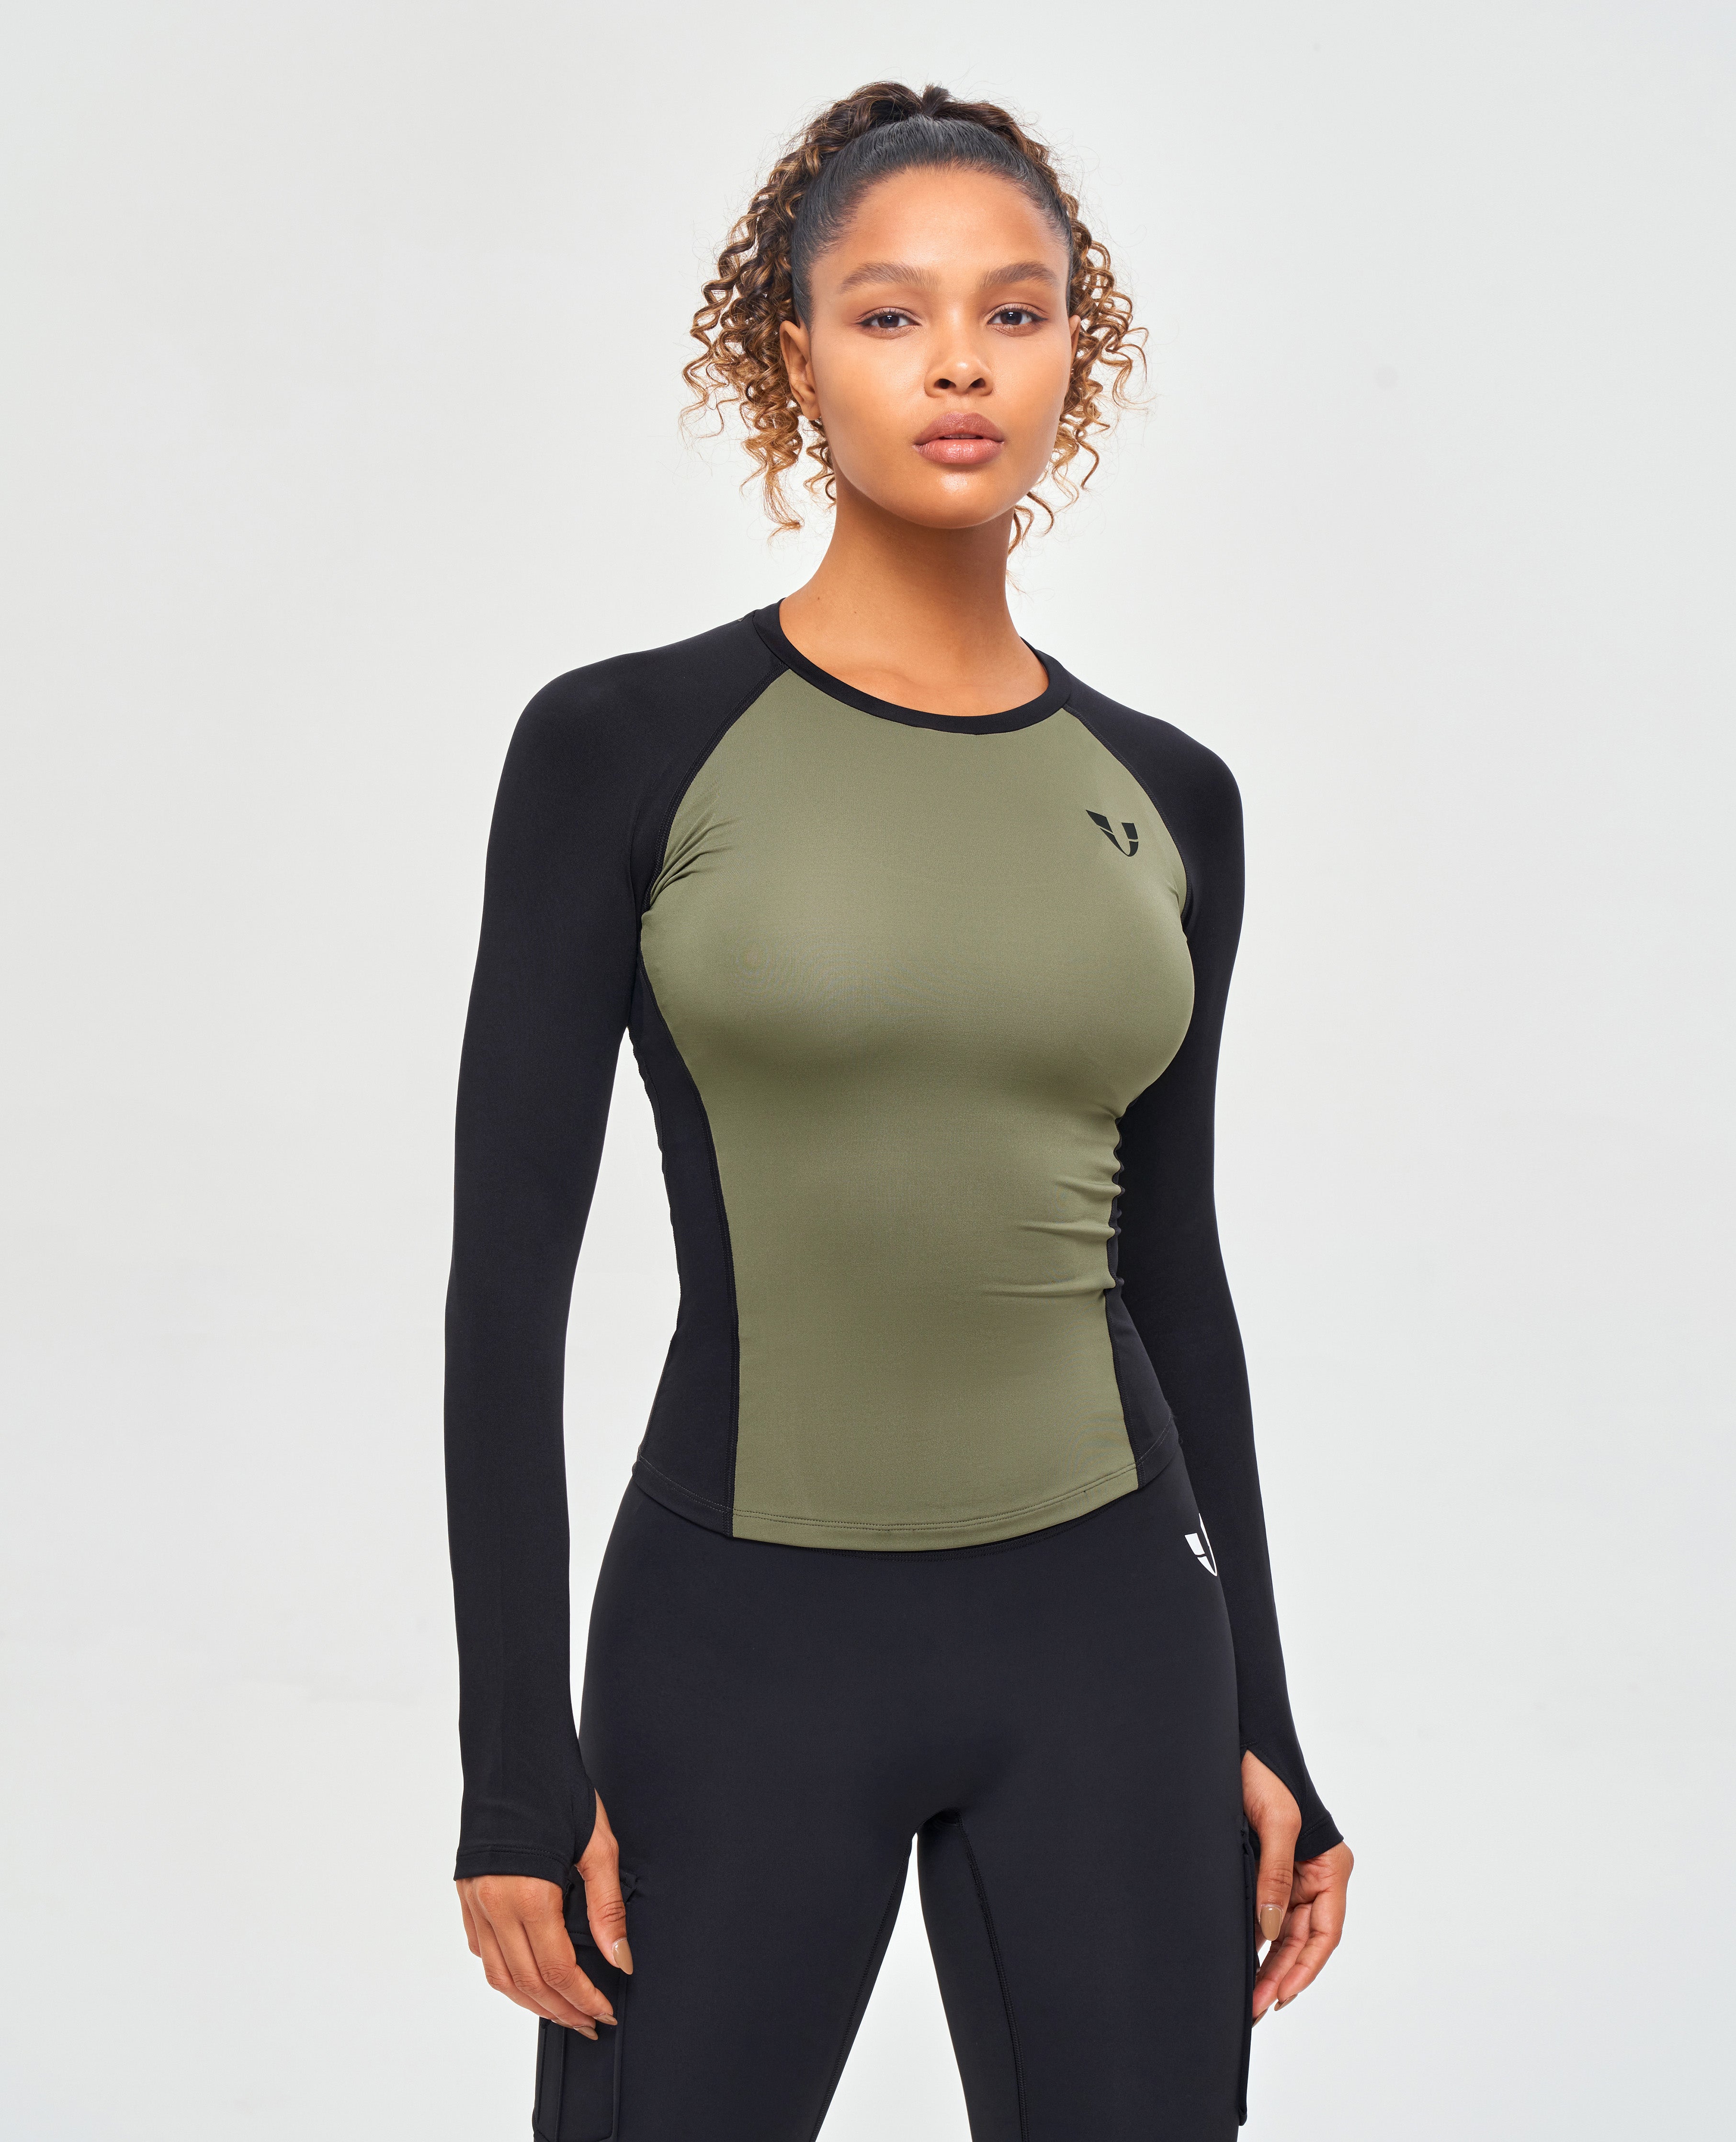 Contrast Color Long Sleeve T-shirt - Olive Green and Black